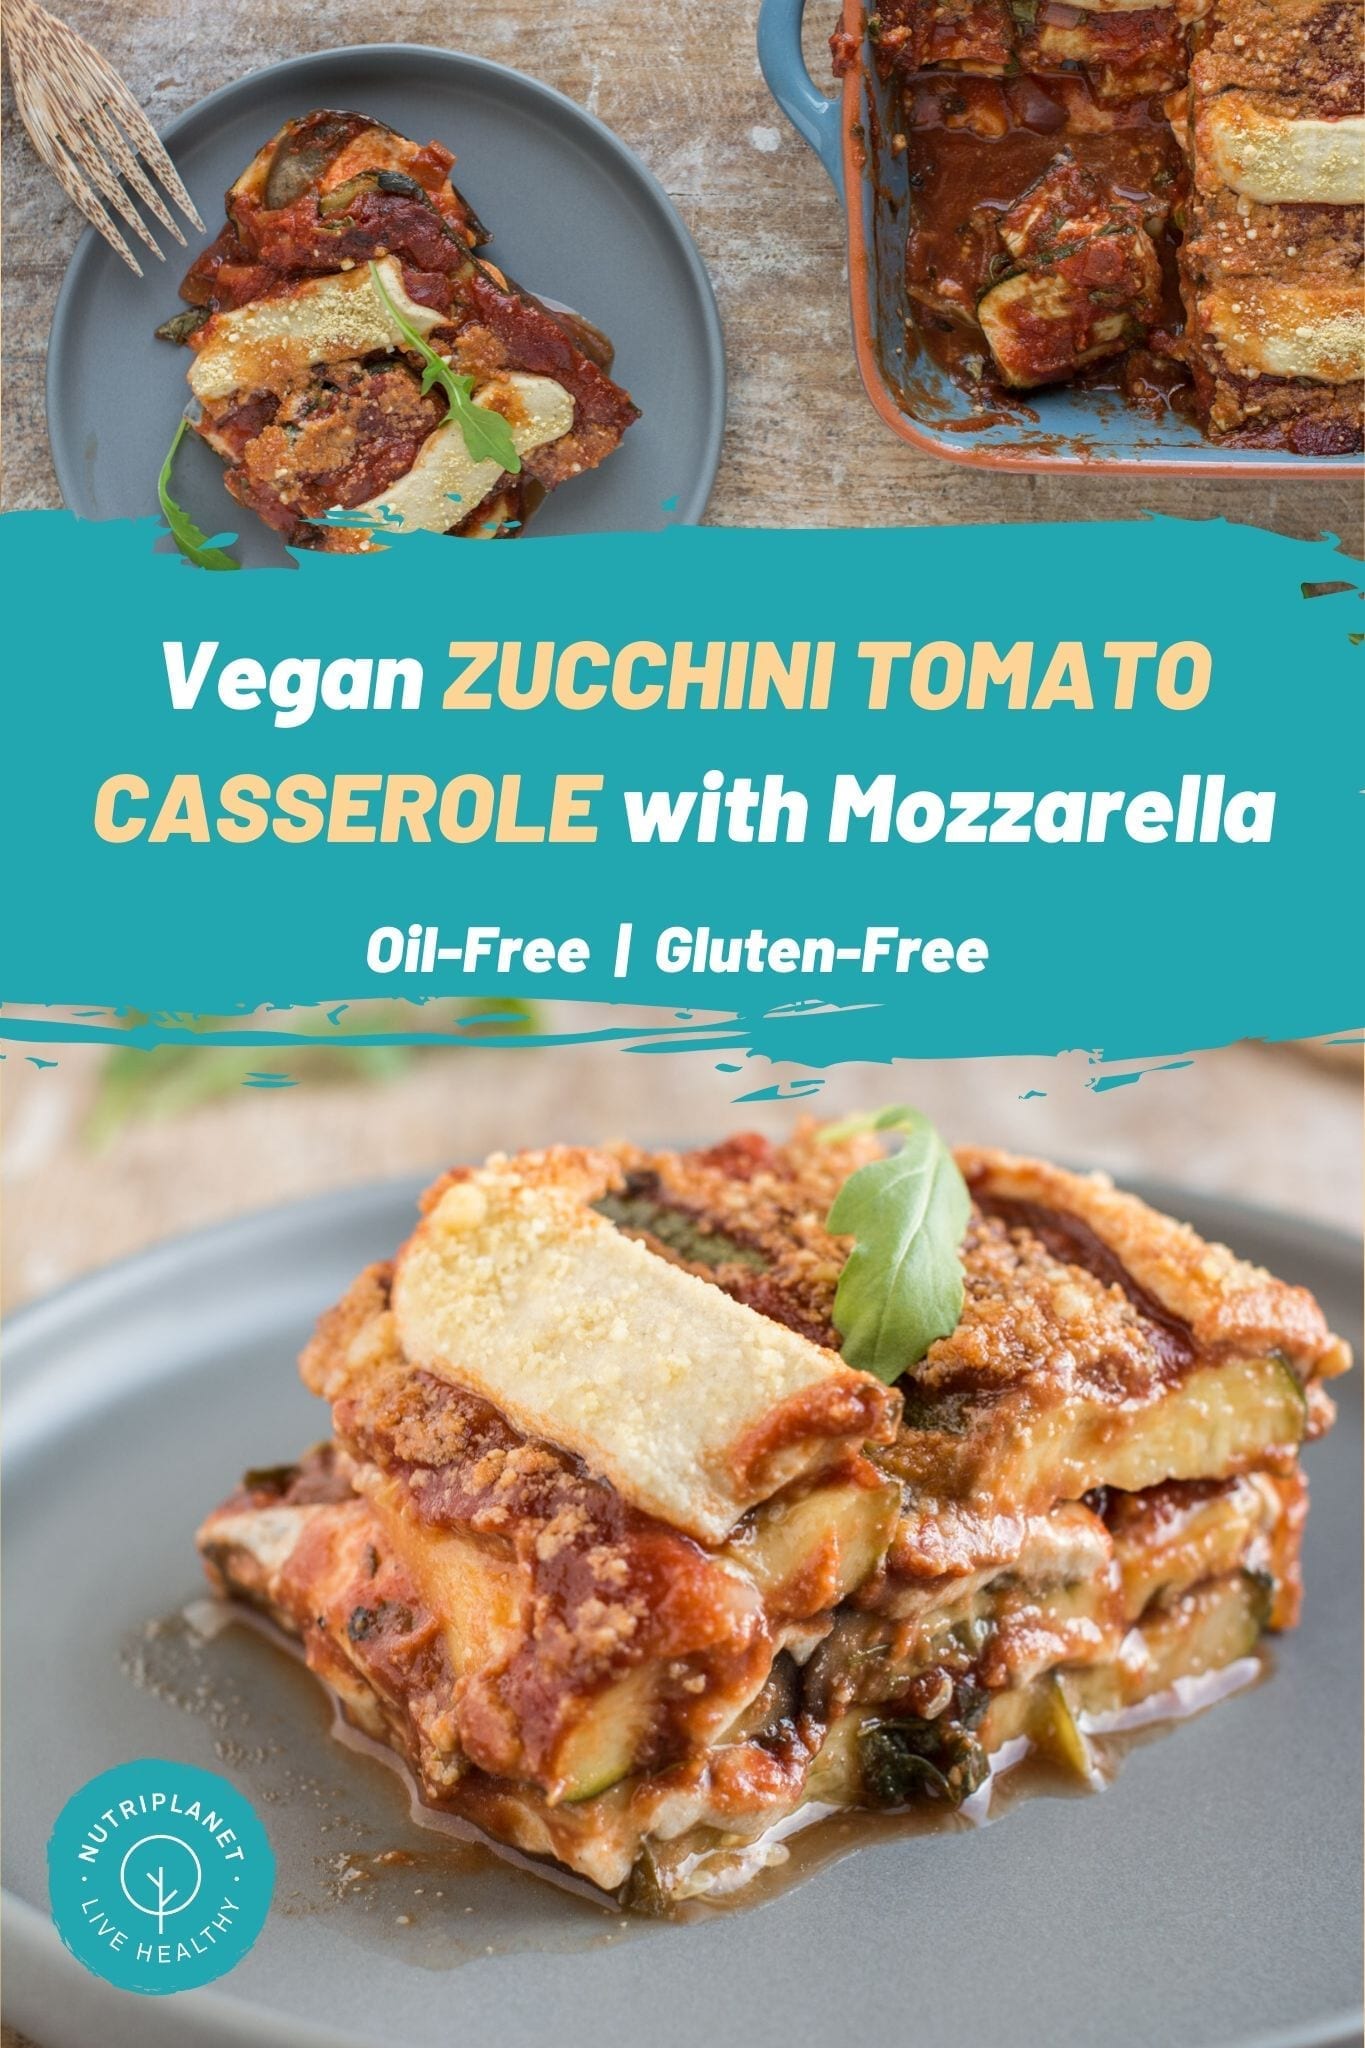 Superbly flavourful vegan tomato zucchini casserole with mozzarella that is oil-free and gluten-free. Excellent Mediterranean vegan recipe for side dish or main meal. 